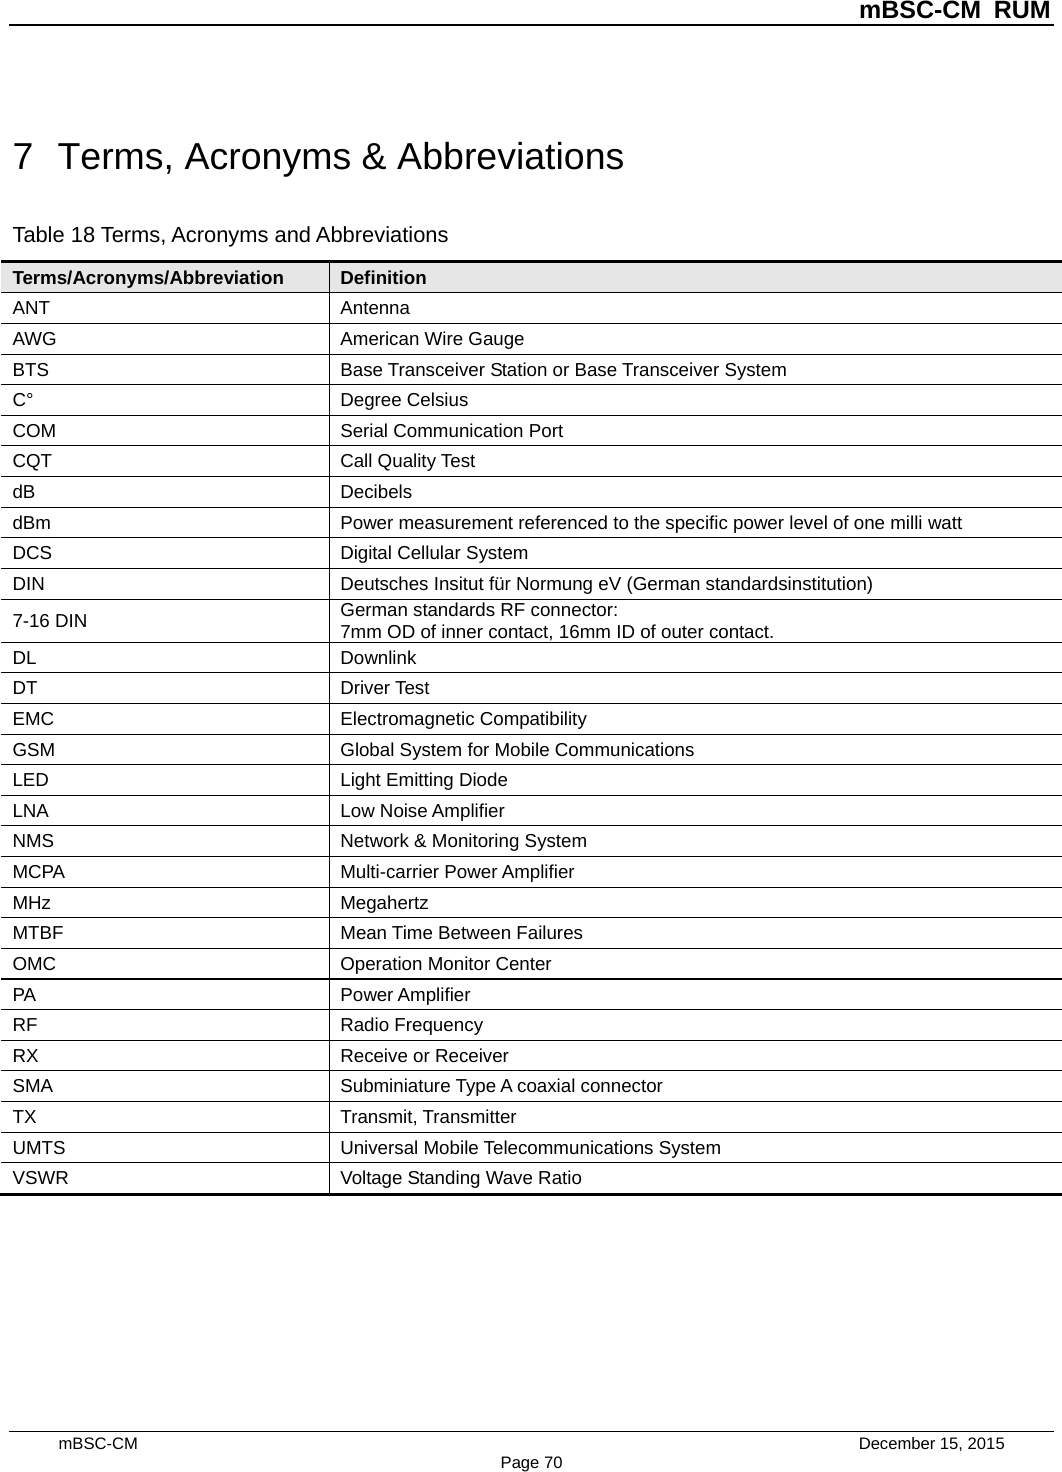 mBSC-CM RUM mBSC-CM    December 15, 2015 Page 707  Terms, Acronyms &amp; Abbreviations Table 18 Terms, Acronyms and Abbreviations Terms/Acronyms/Abbreviation Definition ANT Antenna AWG American Wire Gauge BTS  Base Transceiver Station or Base Transceiver System C° Degree Celsius COM Serial Communication Port CQT Call Quality Test dB Decibels dBm Power measurement referenced to the specific power level of one milli watt DCS Digital Cellular System DIN Deutsches Insitut für Normung eV (German standardsinstitution) 7-16 DIN German standards RF connector: 7mm OD of inner contact, 16mm ID of outer contact. DL Downlink DT Driver Test EMC  Electromagnetic Compatibility GSM  Global System for Mobile Communications LED Light Emitting Diode LNA Low Noise Amplifier NMS Network &amp; Monitoring System MCPA Multi-carrier Power Amplifier MHz Megahertz MTBF Mean Time Between Failures OMC  Operation Monitor Center PA Power Amplifier RF Radio Frequency RX Receive or Receiver SMA  Subminiature Type A coaxial connector TX Transmit, Transmitter UMTS Universal Mobile Telecommunications System VSWR  Voltage Standing Wave Ratio 